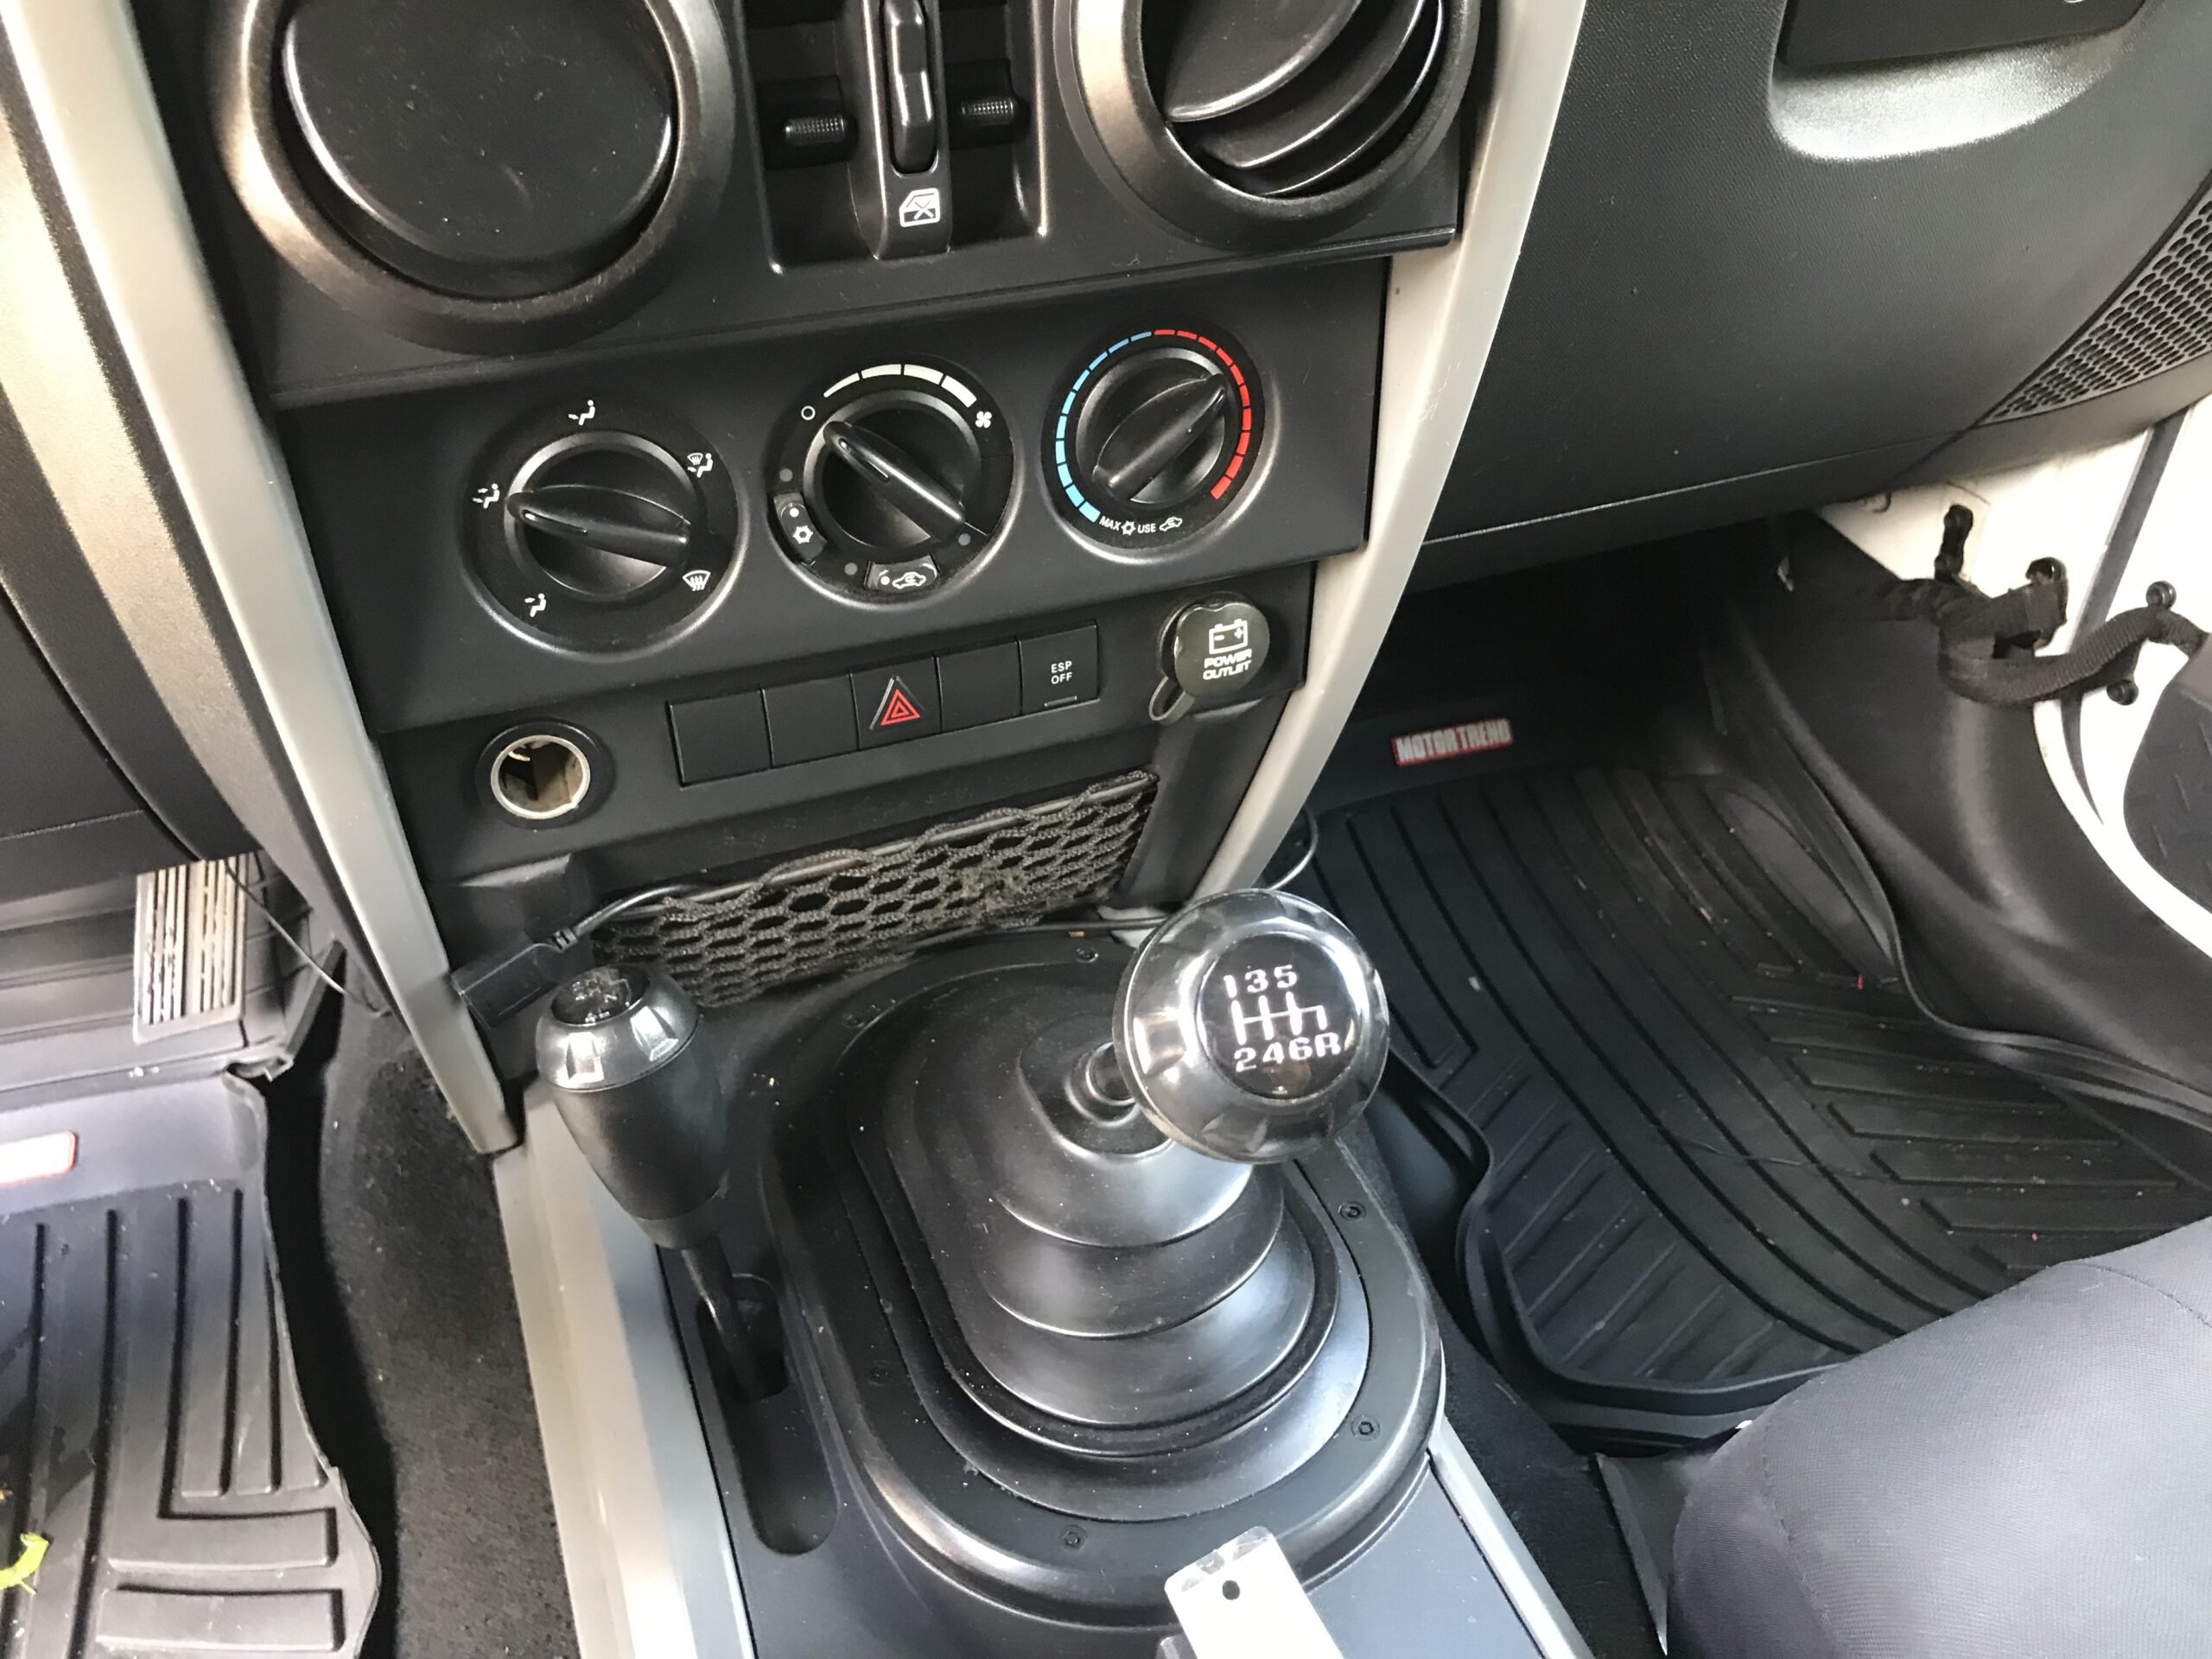 2009 Jeep Wrangler Unlimited 4dr. minor collision damage (see pictures). RUNS AND DRIVES. Good airbags. $8,999. NY907A salvage title. full